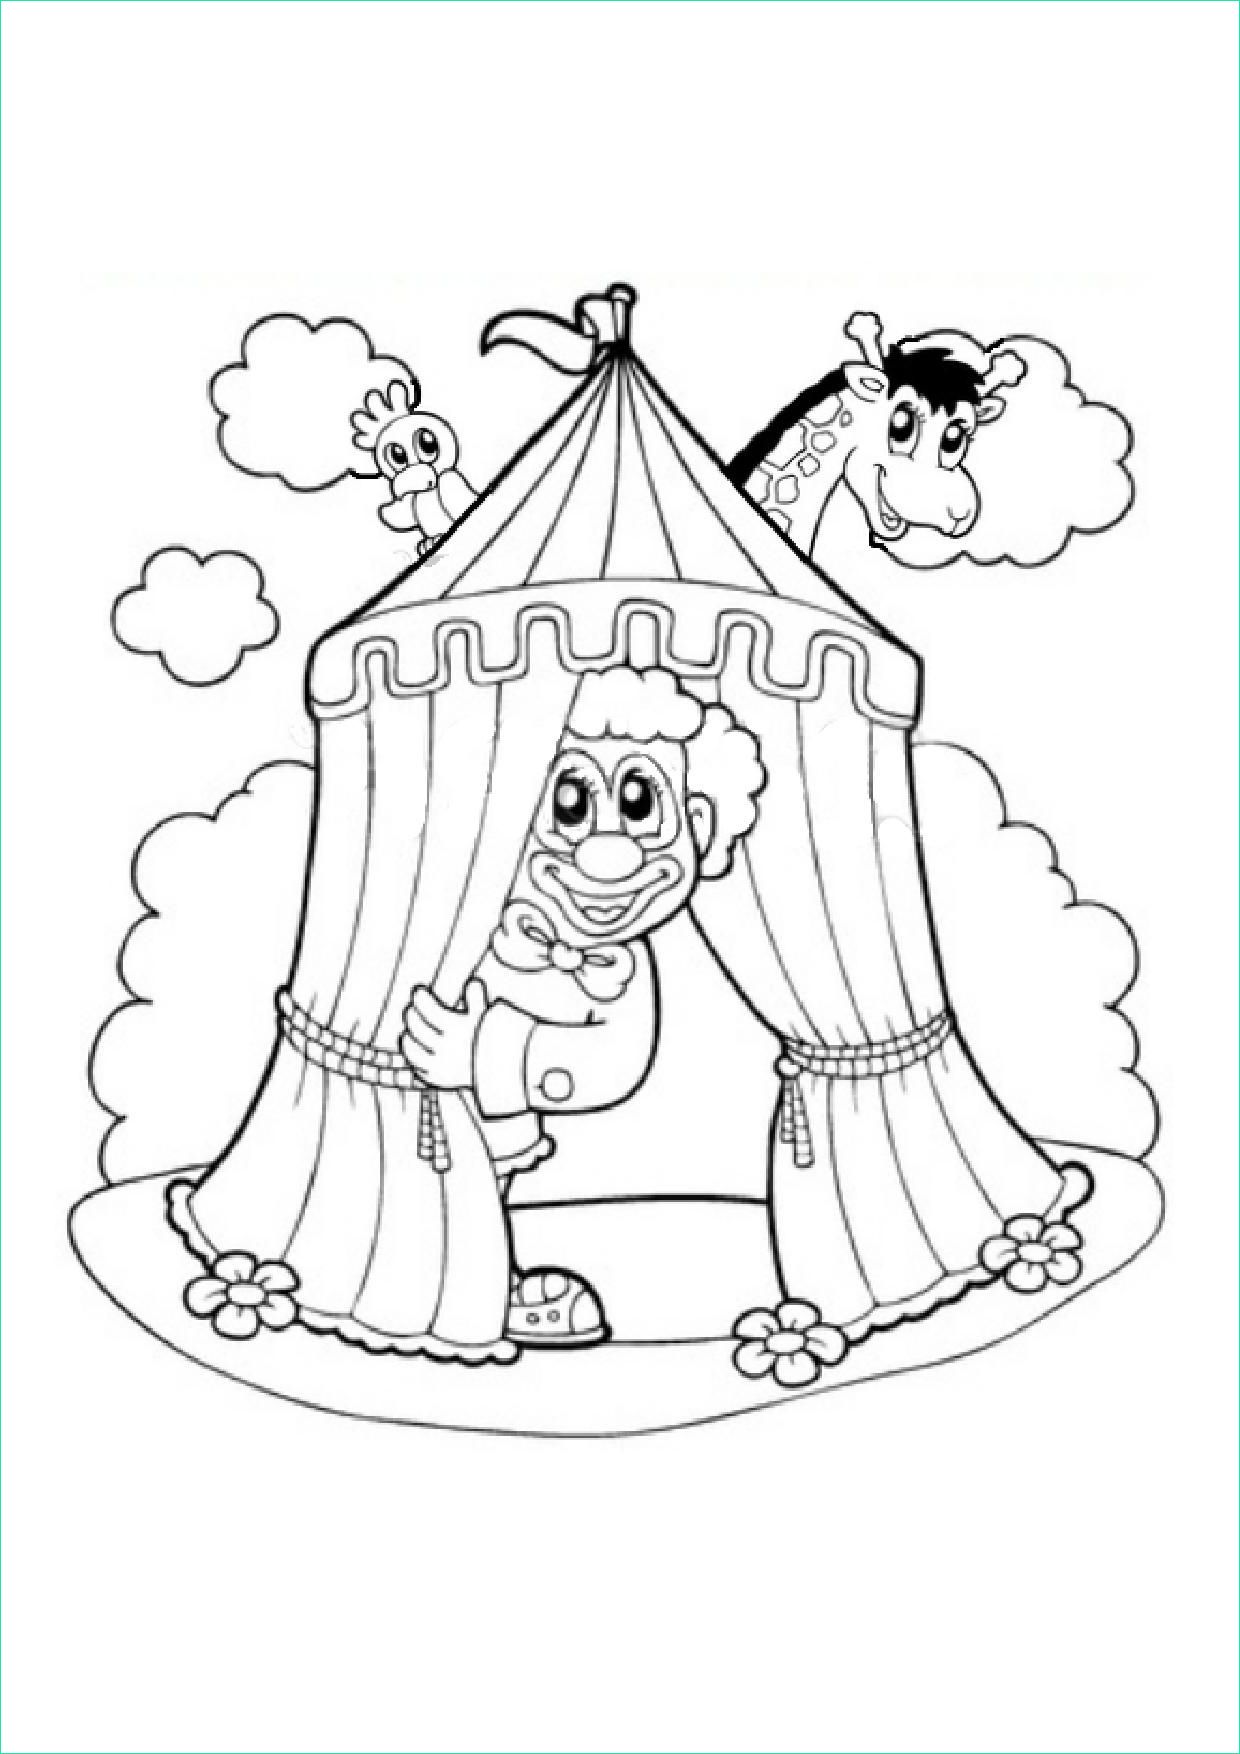 Dessin Cirque Cool Photographie Coloriage Canrnaval